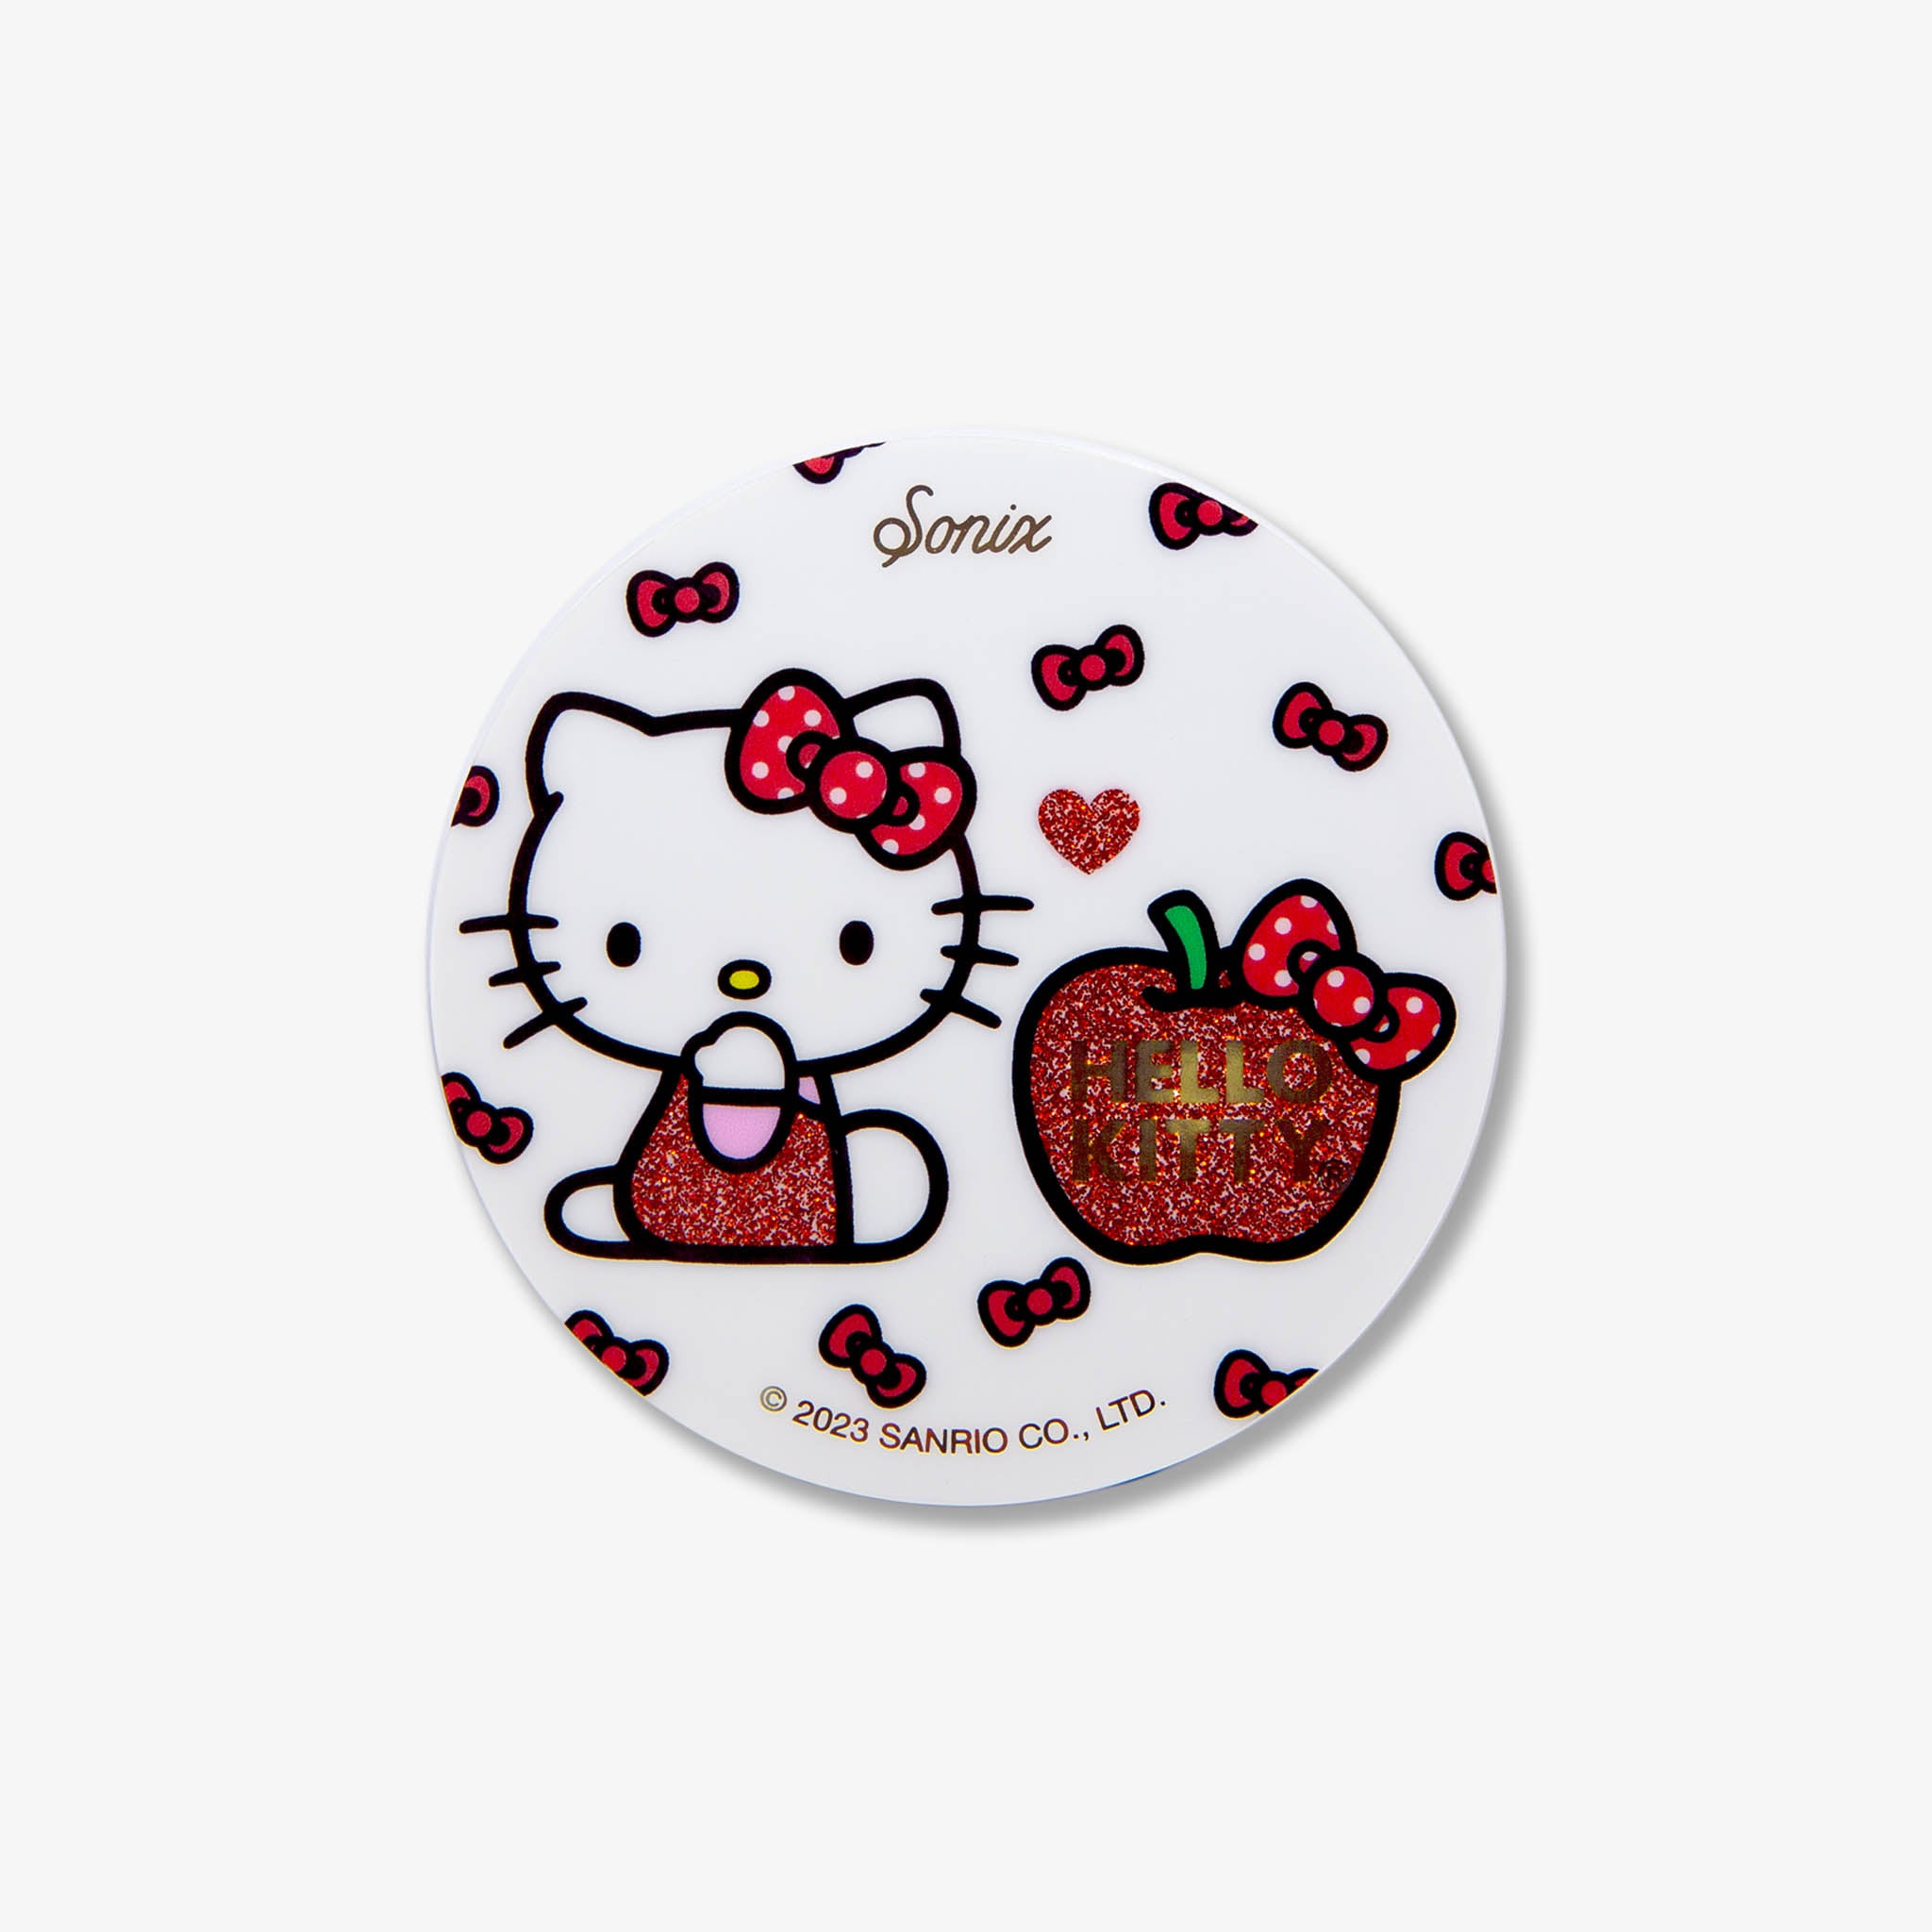 MagLink™ Magnetic Charger - Apples to Apples Hello Kitty®